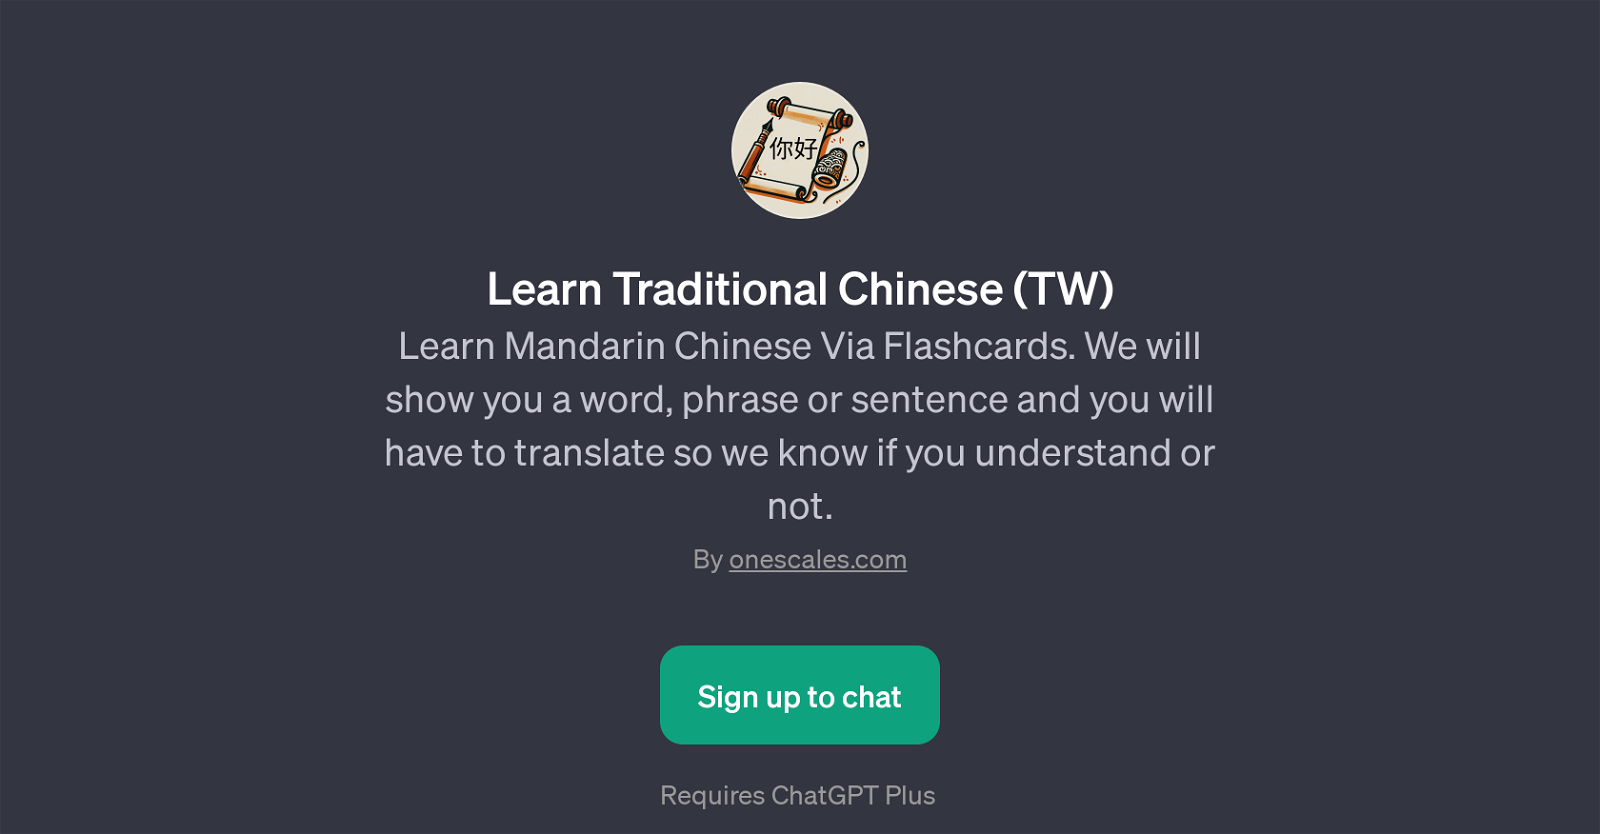 Learn Traditional Chinese (TW) website